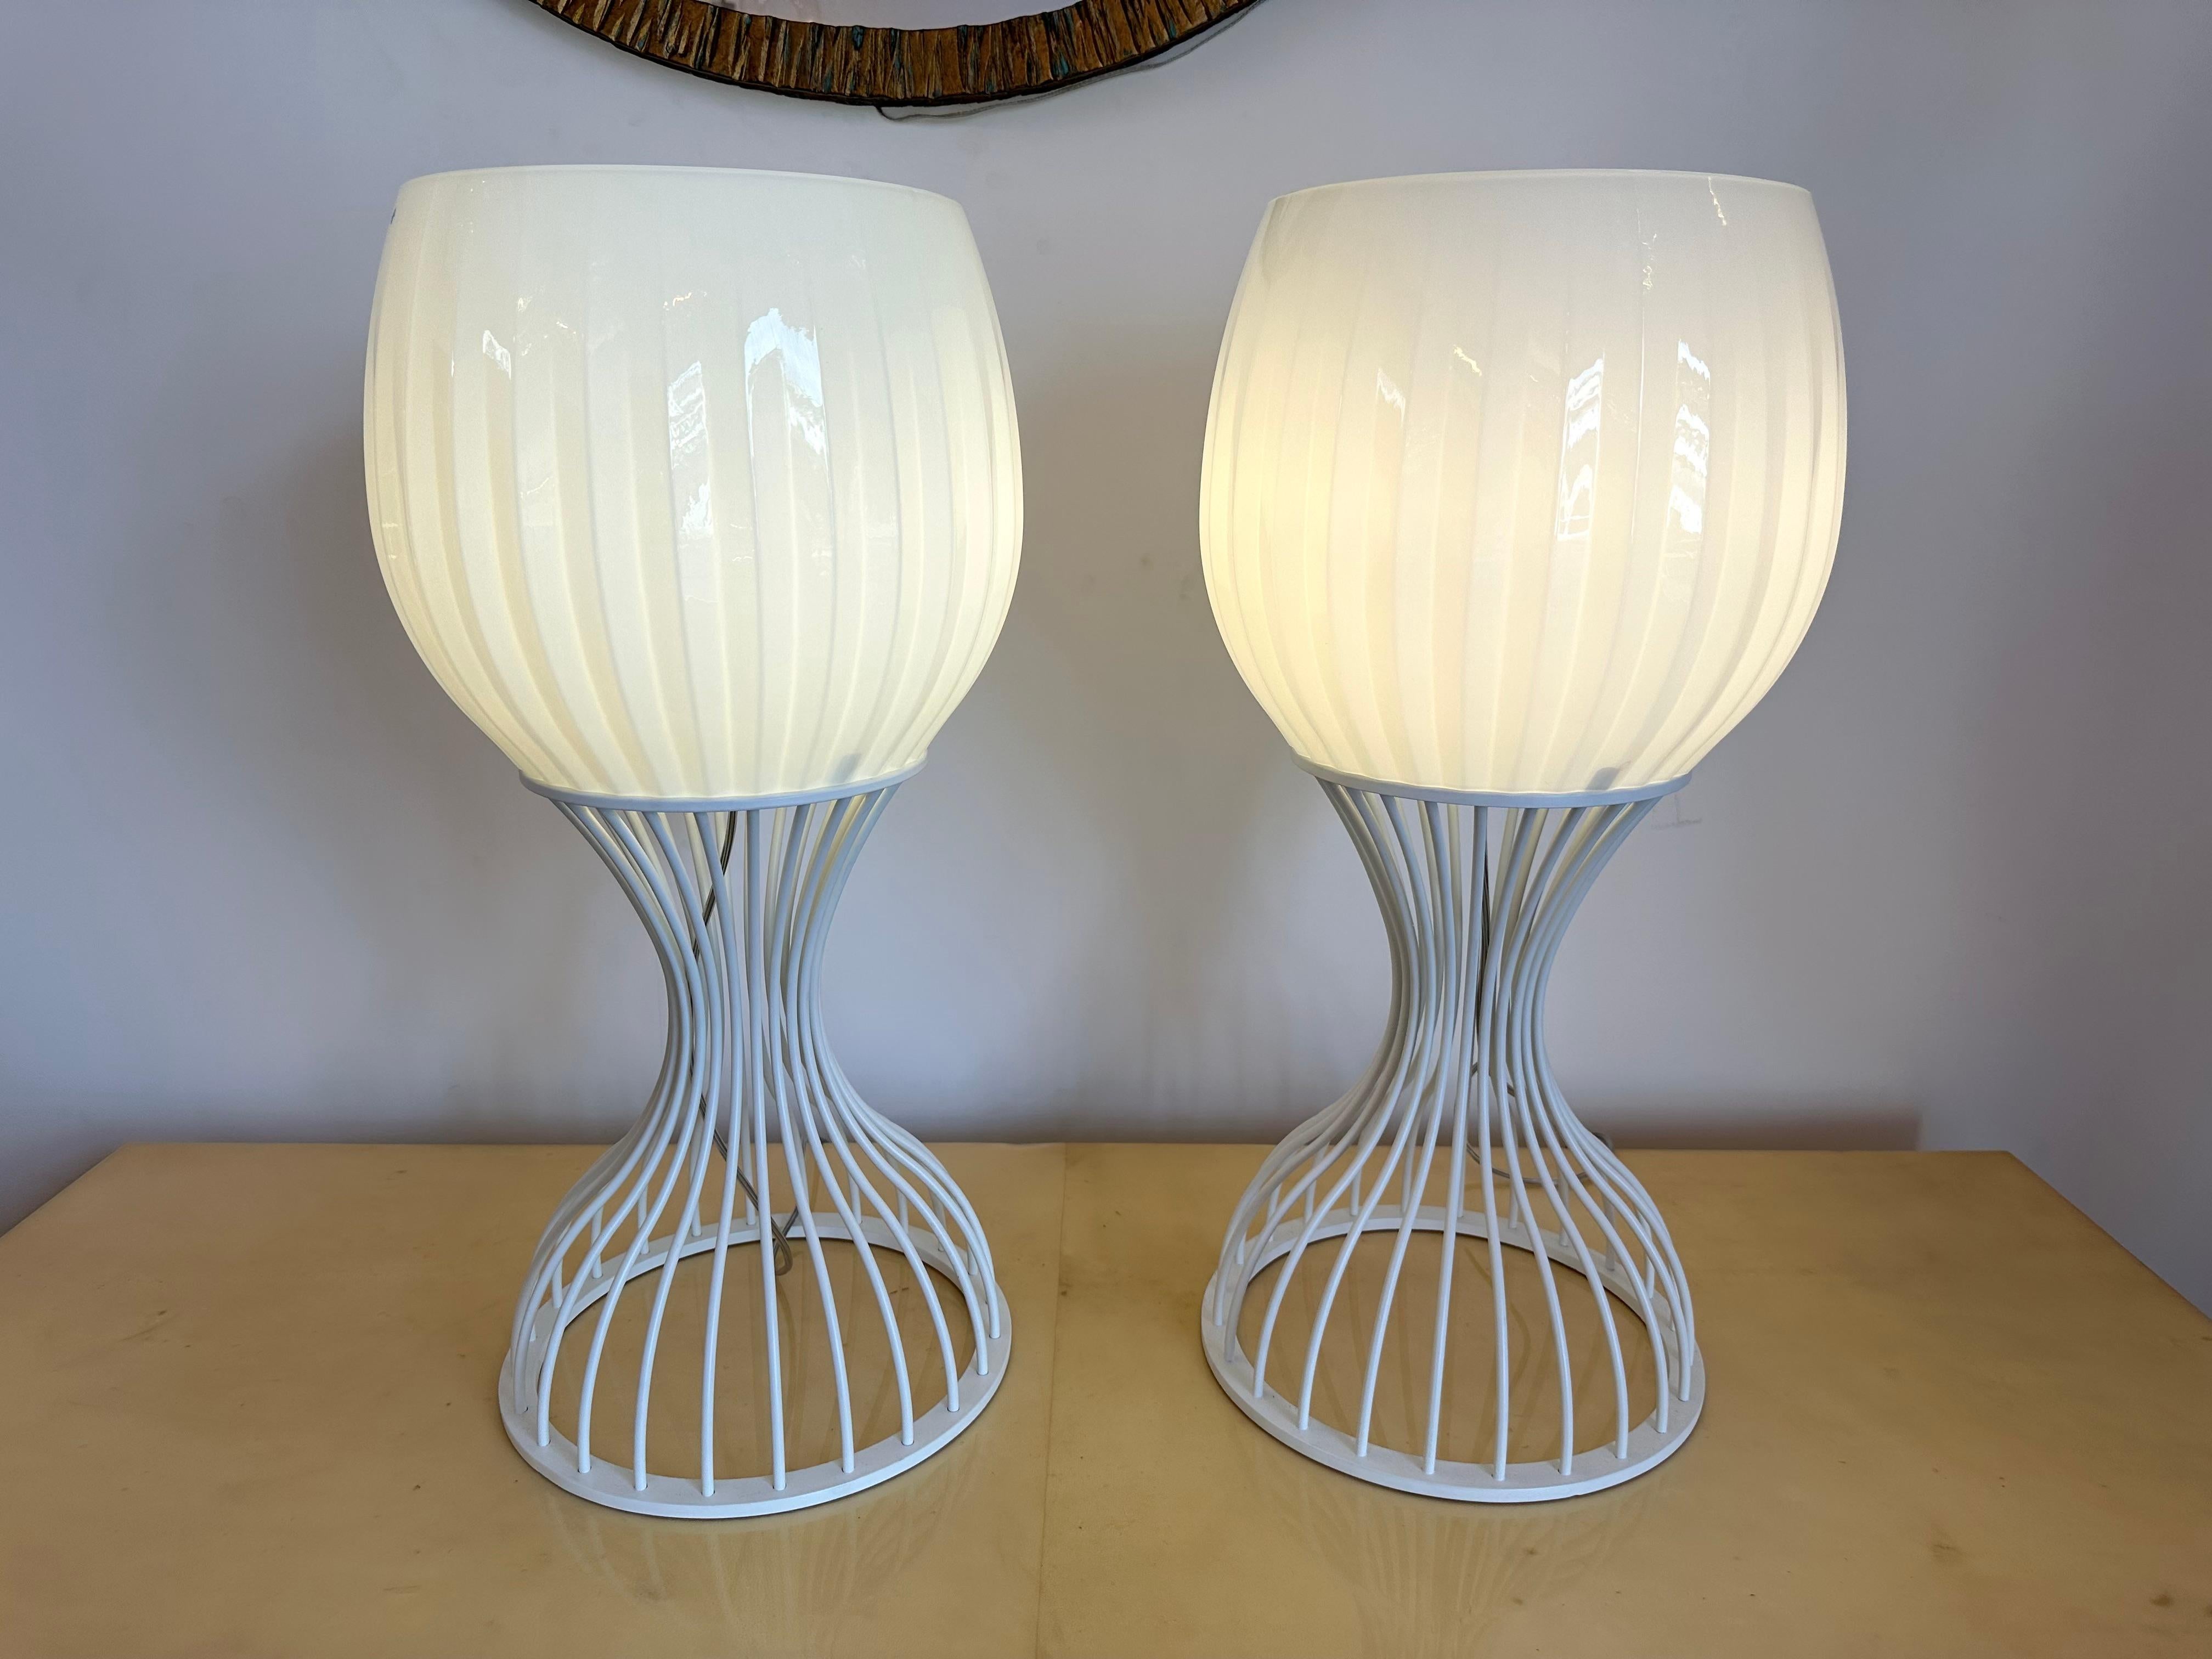 Pair of Lamps Cup Murano Glass and White Metal by Vistosi, Italy, 1990s For Sale 2